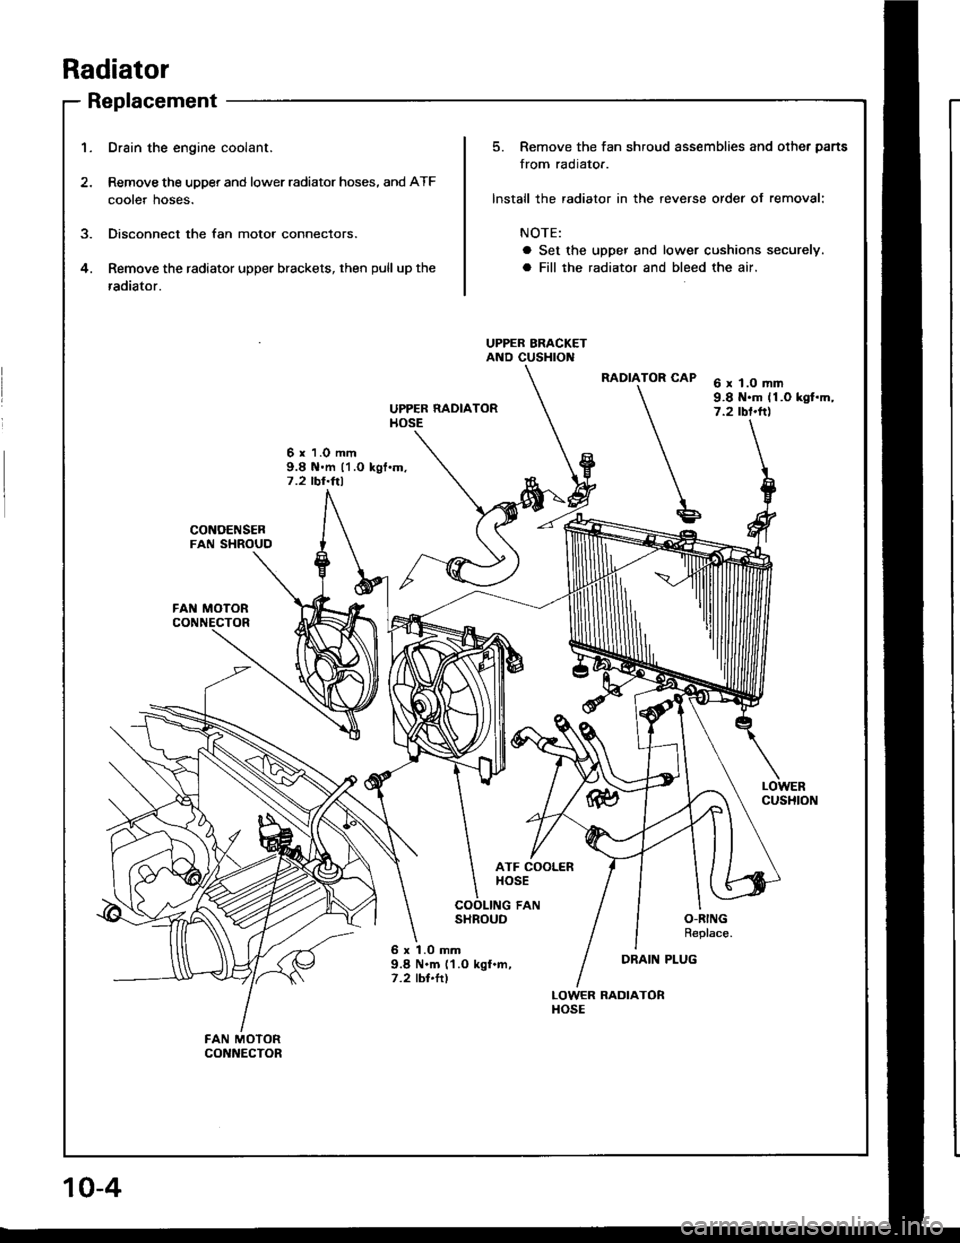 ACURA INTEGRA 1994  Service Repair Manual Radiator
Replacement
1.Drain the engine coolant.
Remove the upper and lower radiator hoses, and ATF
cooter noses.
Disconnect the fan motor connectors.
Remove the radiator upper brackets, then pull up 